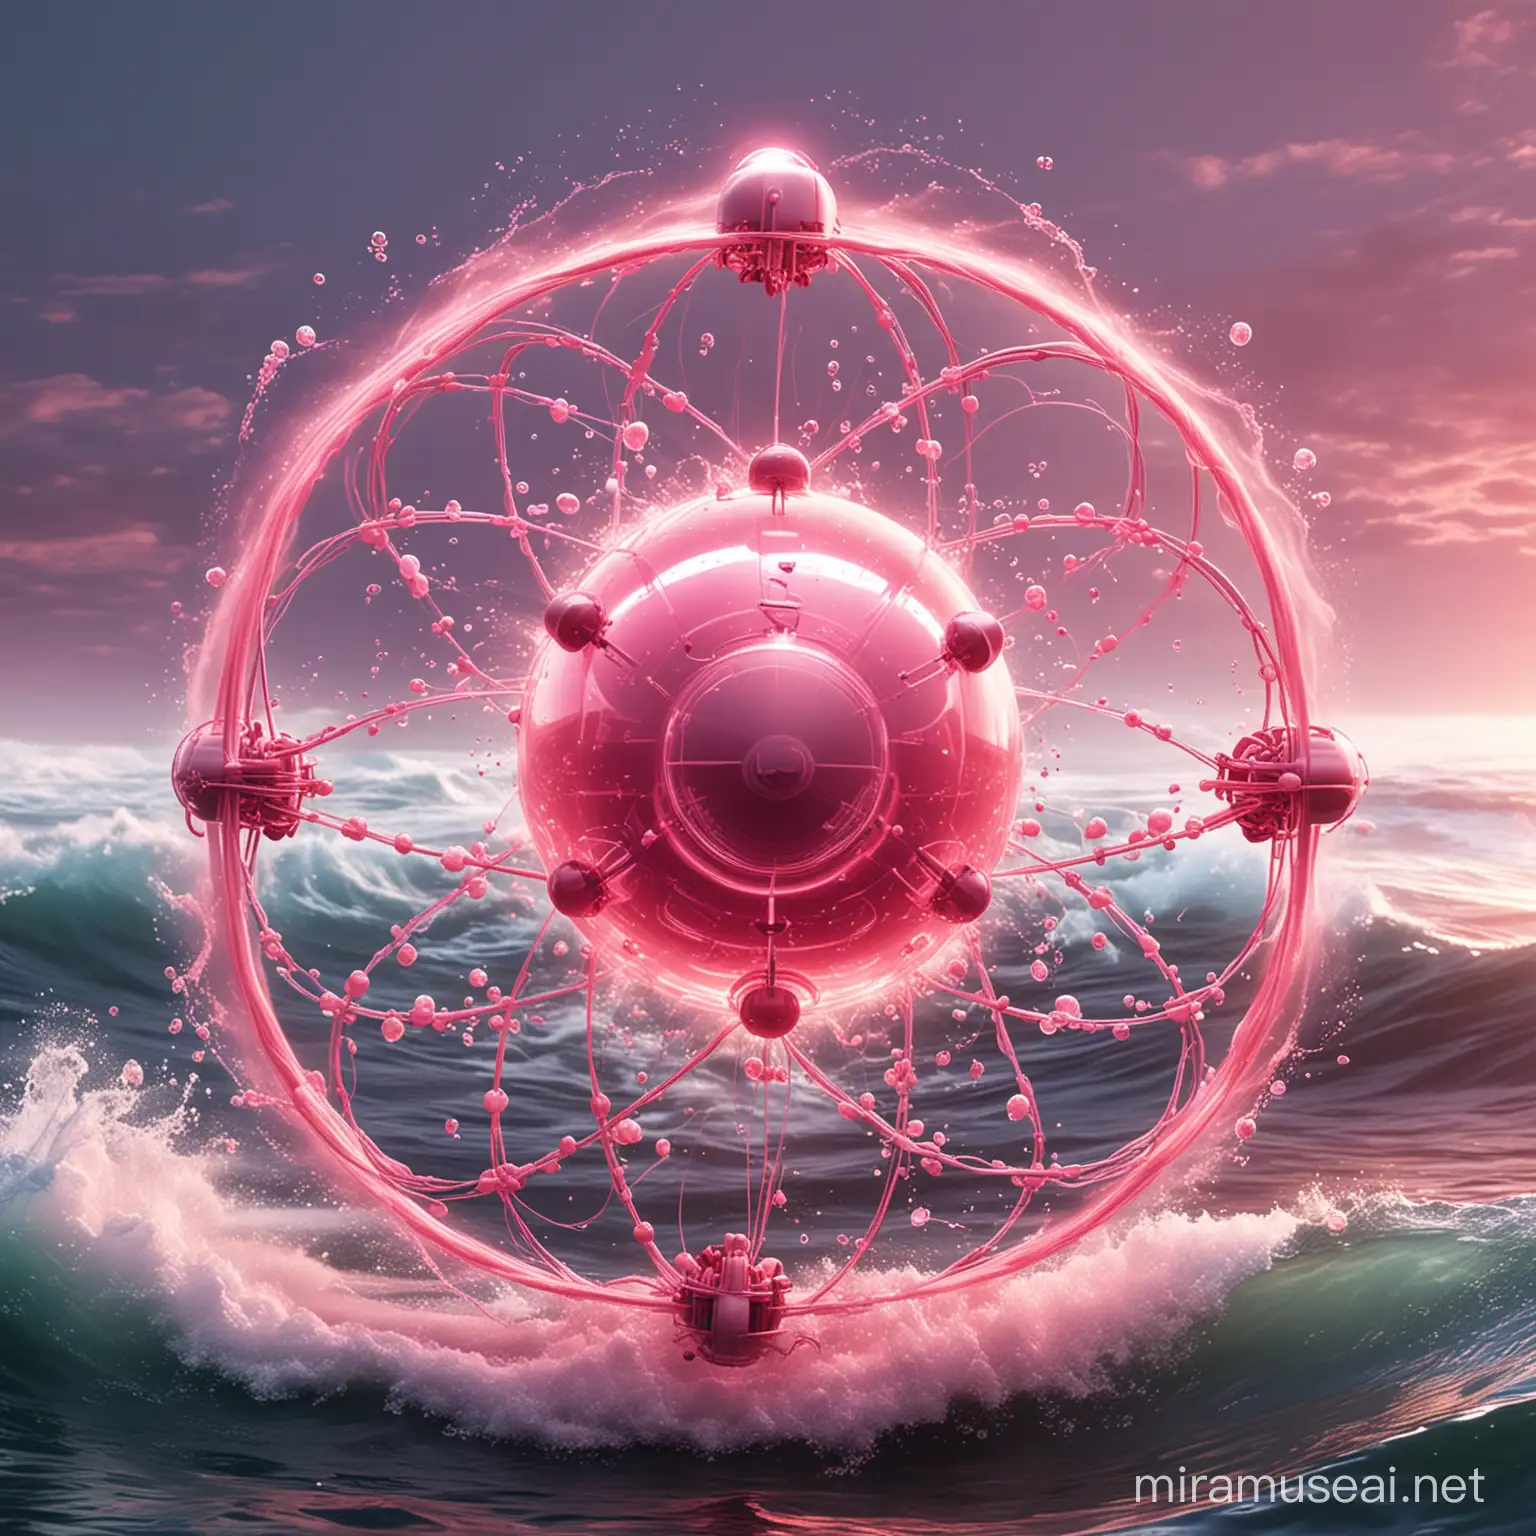 Imagine a stylized illustration featuring a vibrant pink hydrogen atom at the center, surrounded by swirling waves of water molecules and energetic bursts of nuclear power. The hydrogen atom could be depicted with a soft pink glow, symbolizing its unique production process through water electrolysis powered by nuclear energy. This image captures the essence of "pink hydrogen" as an innovative and sustainable energy source with a distinct pink hue.